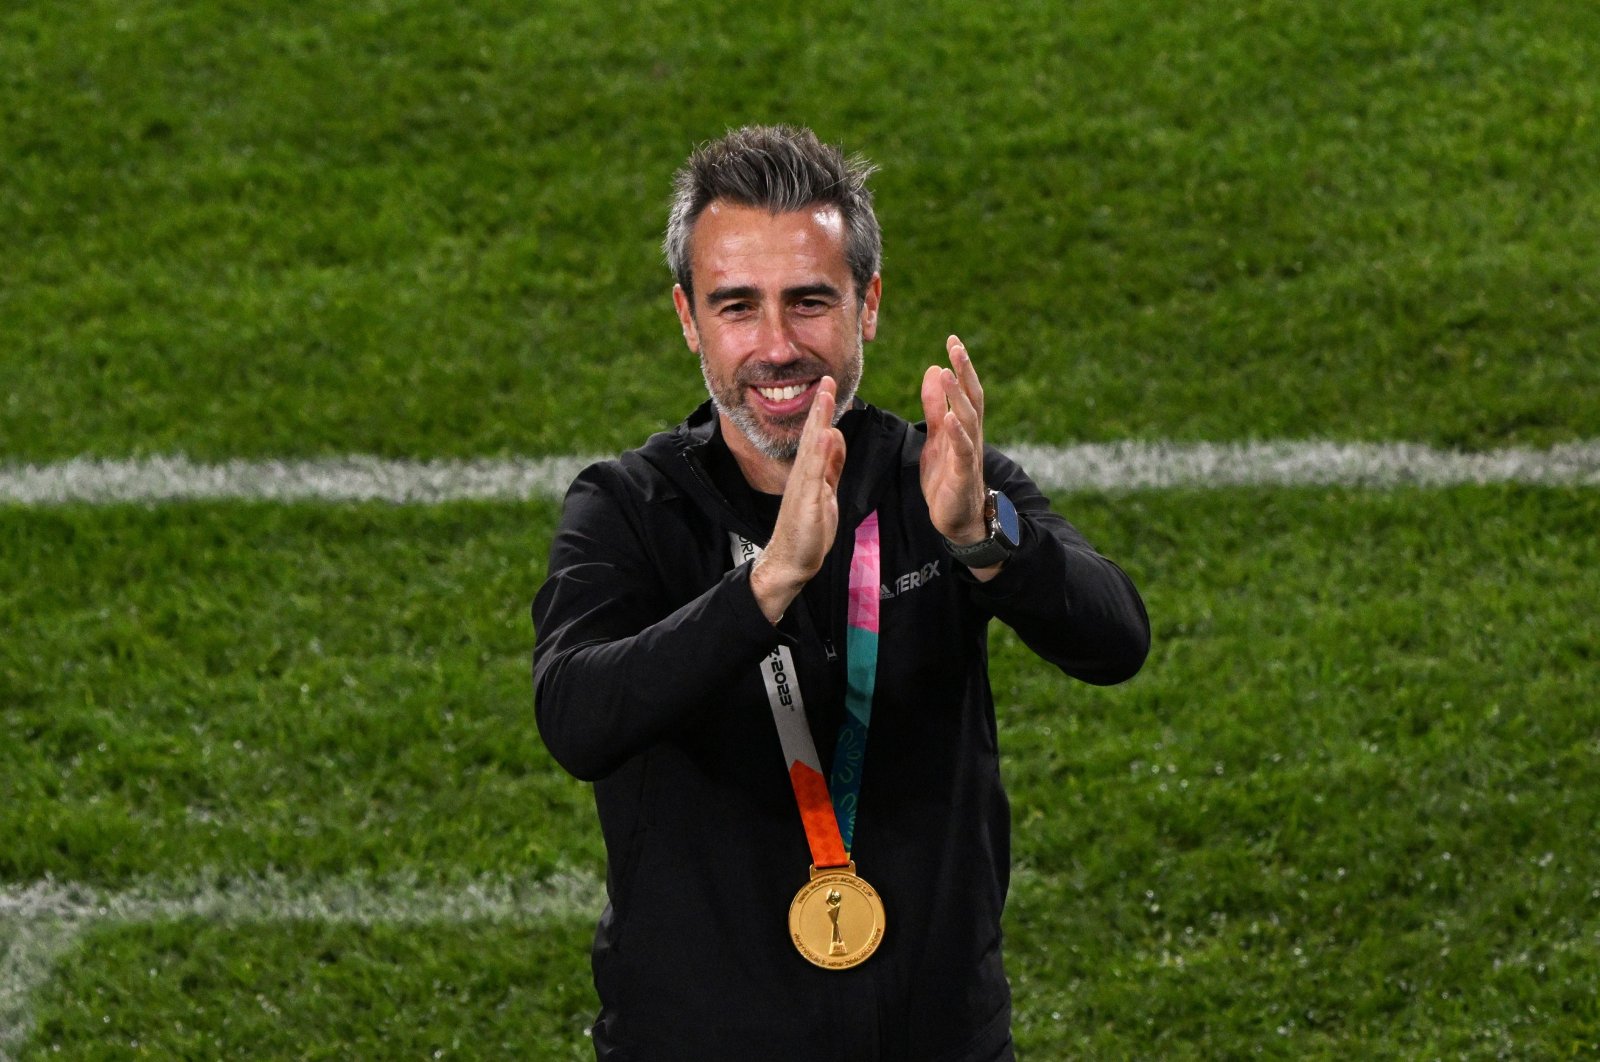 Spain coach faces scrutiny for moot World Cup celebratory gesture